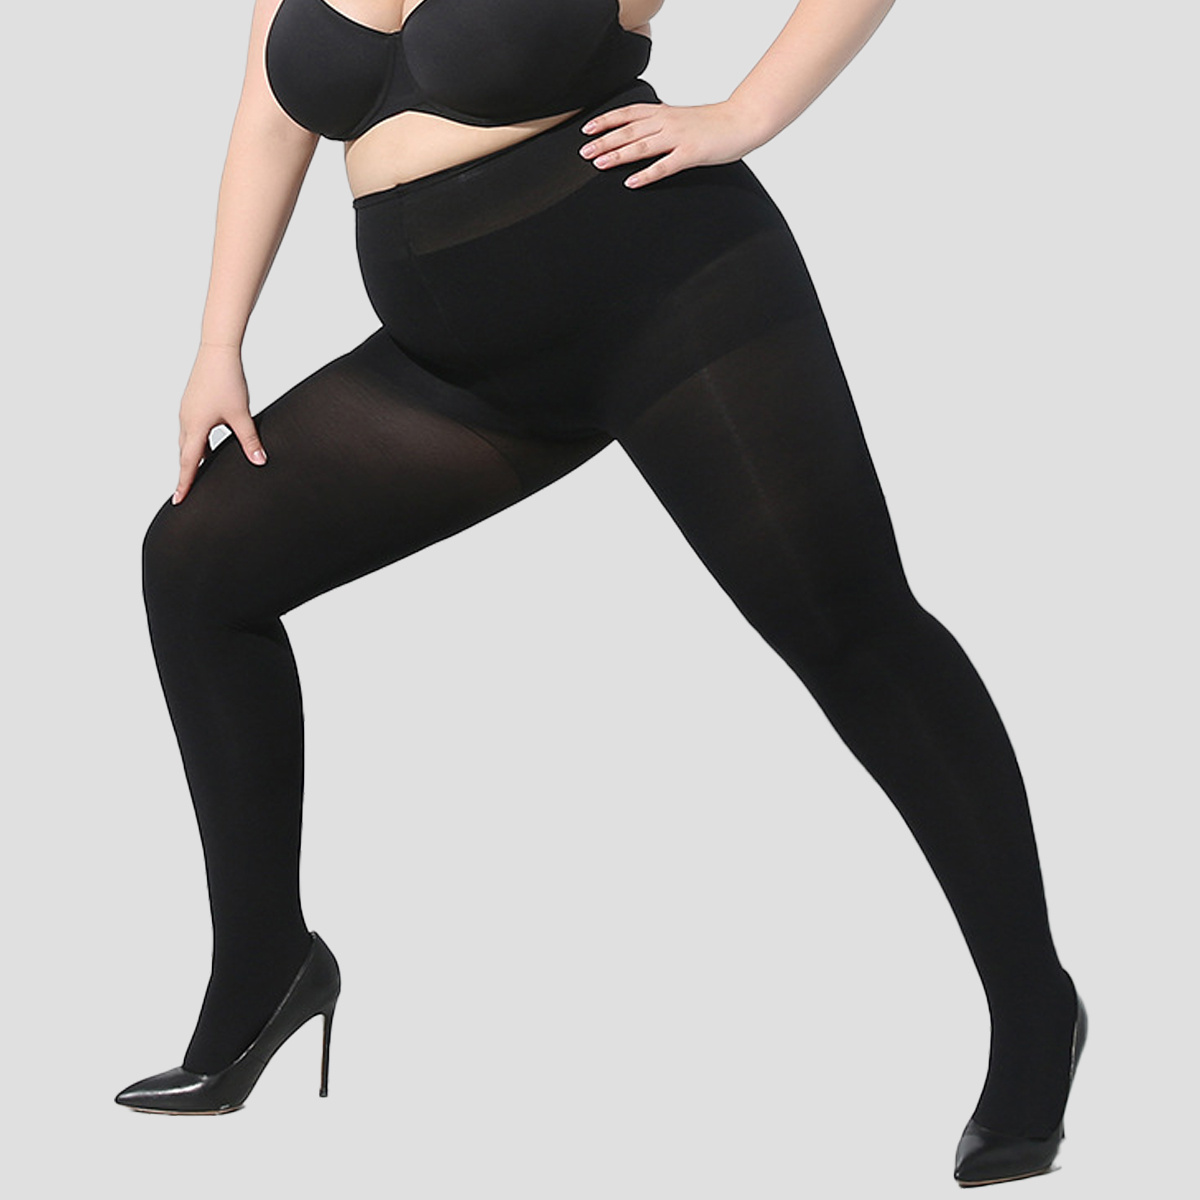 Buy Bg trends new women & Girl's Full Length High Waisted Pantyhose  Stockings with Super Stretch Waistband (FREE SIZE, Black clr) at